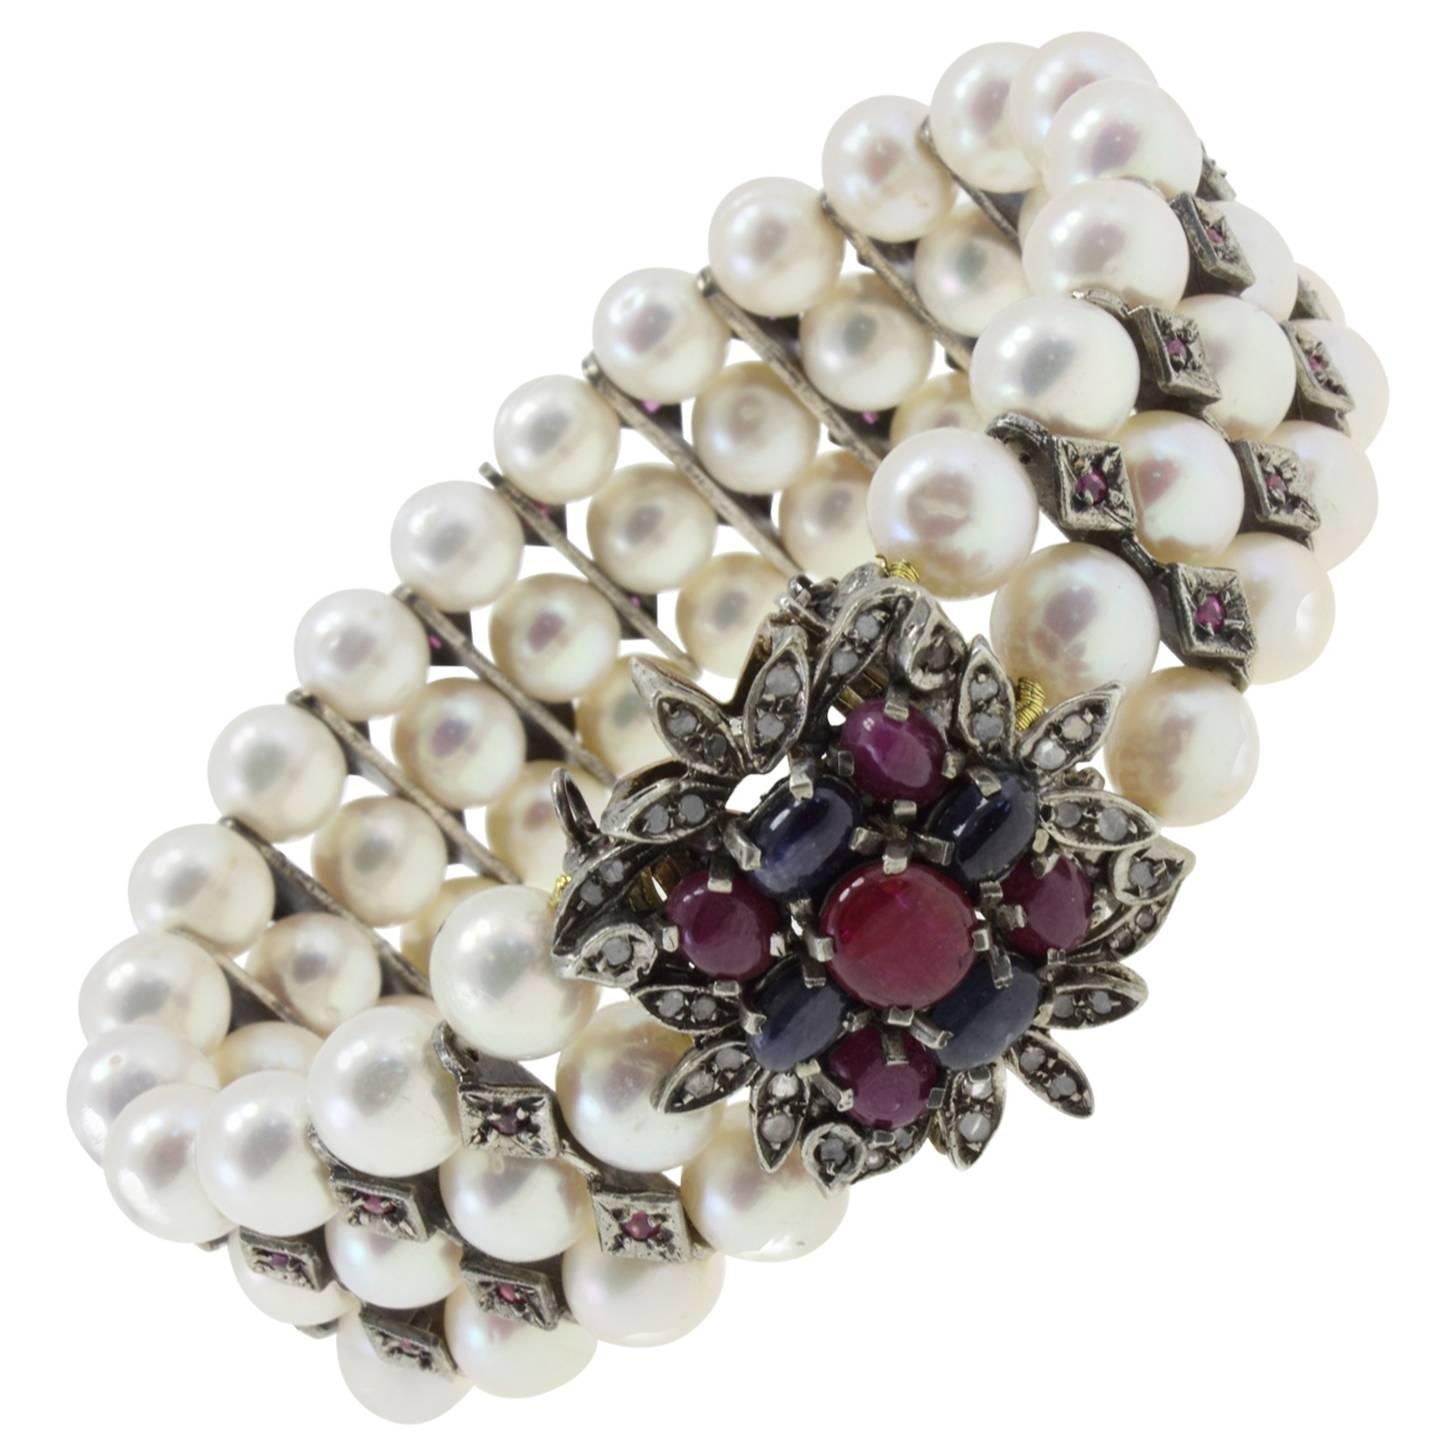 Luise Diamonds Blue Sapphires Rubies Pearls Gold and Silver Bracelet